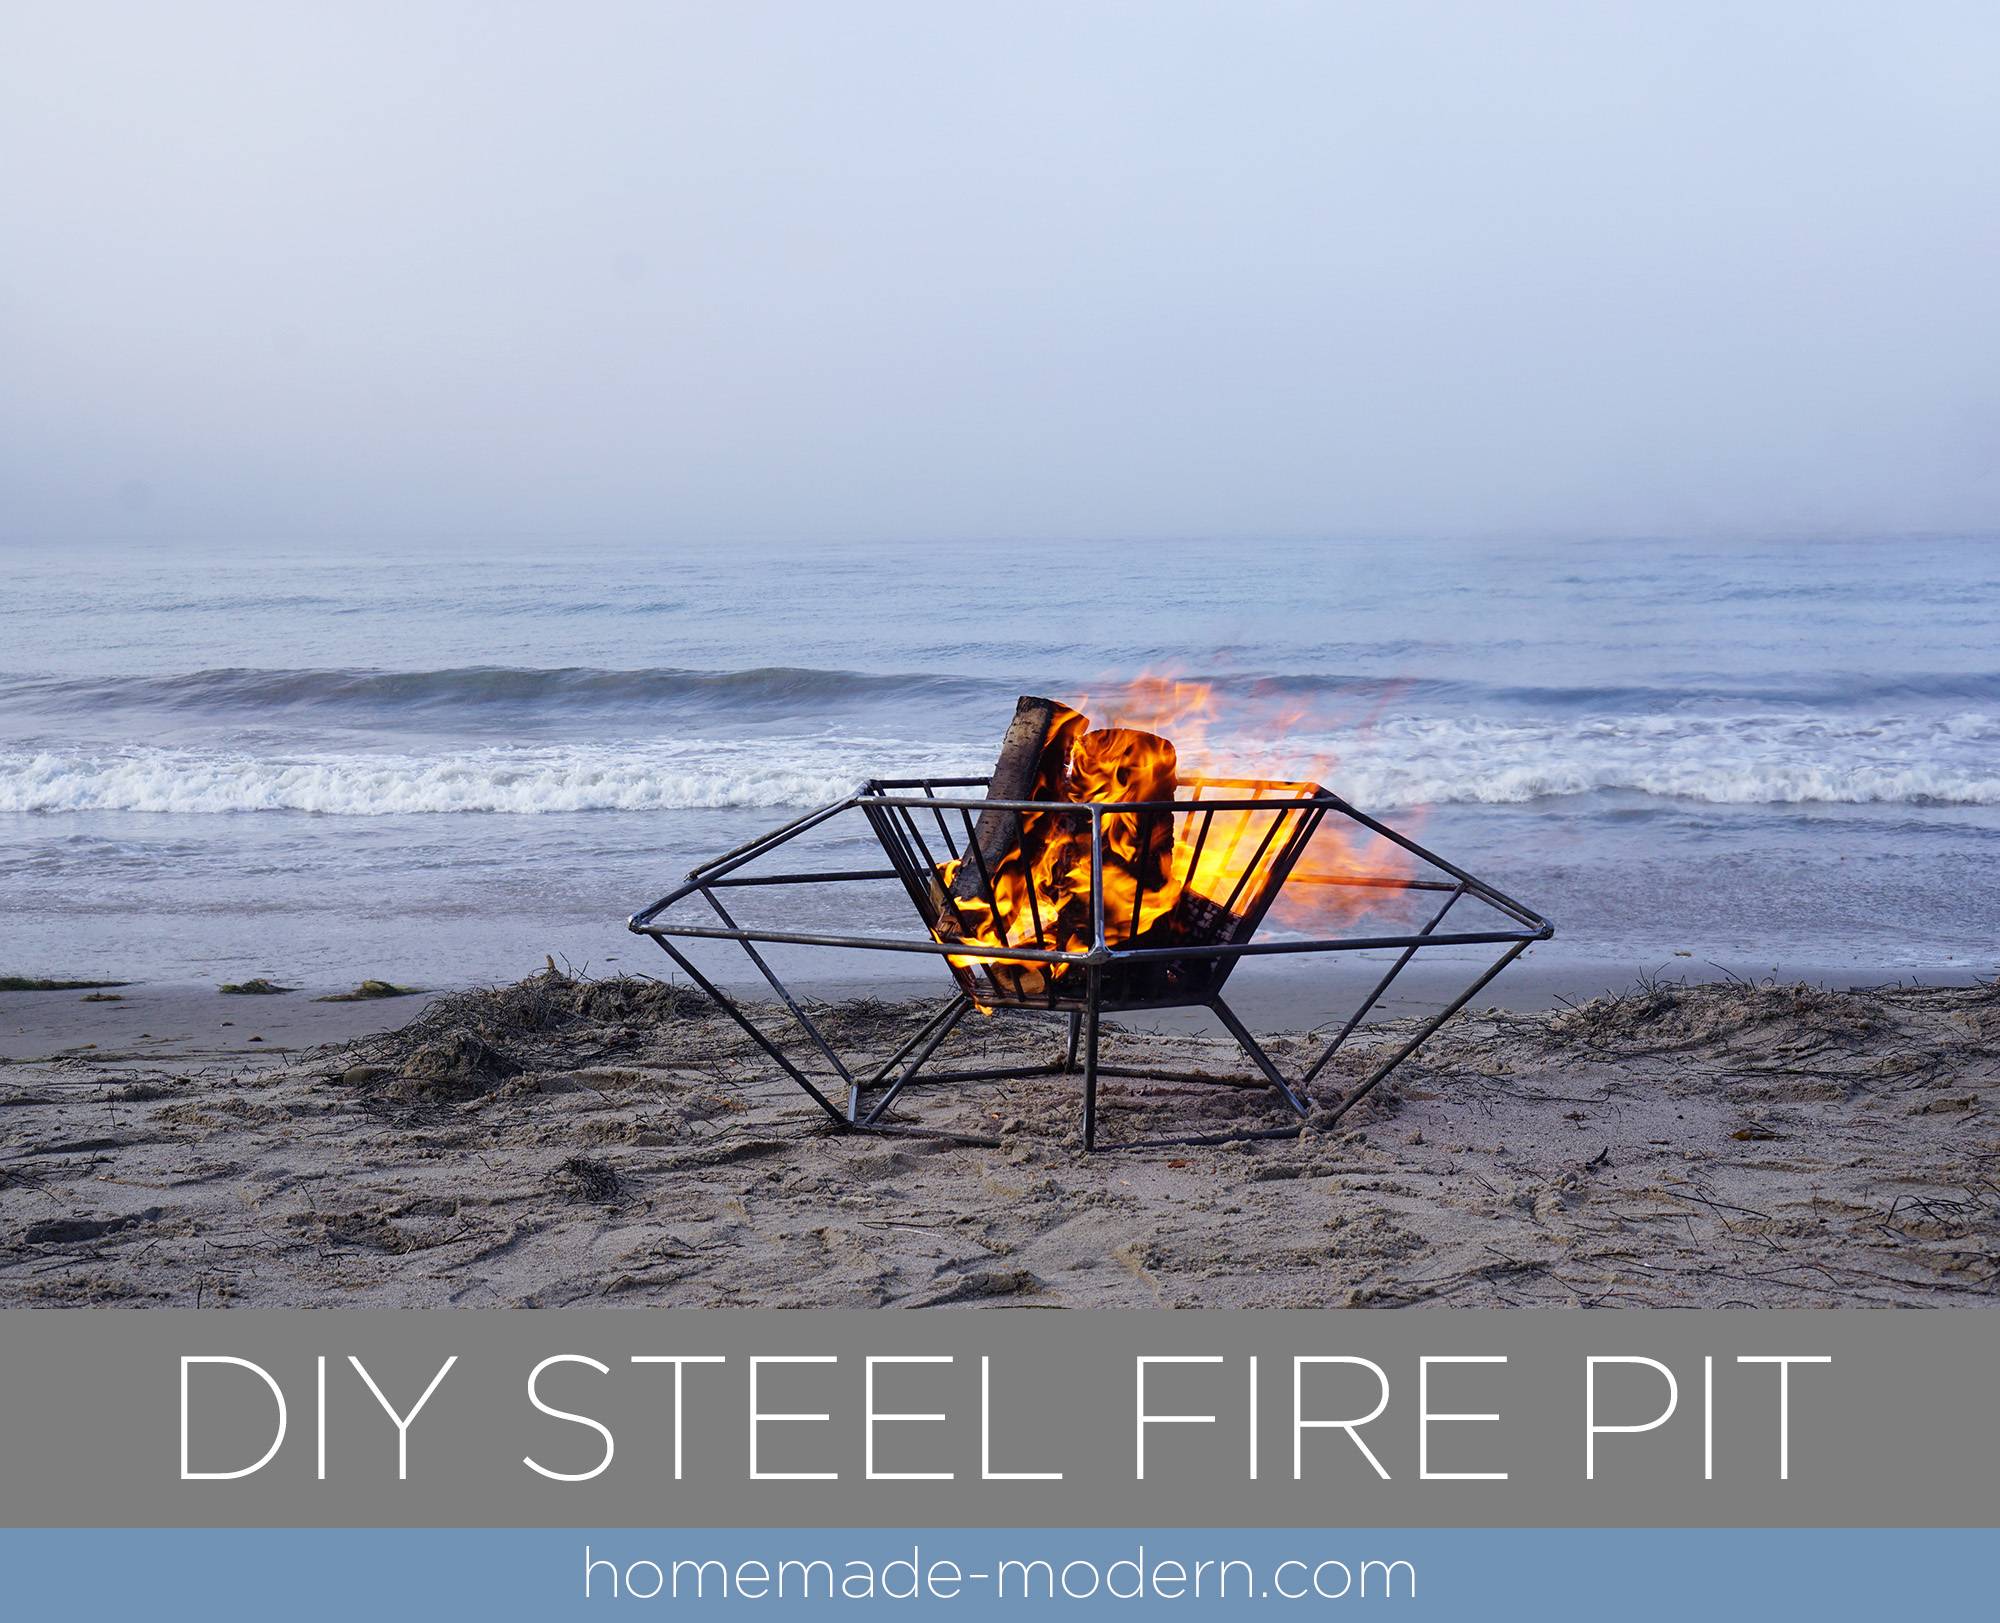 A DIY fire pit is just what your backyard needs this summer, and here are 15 ways to build your own. #firepit #diyfirepit 